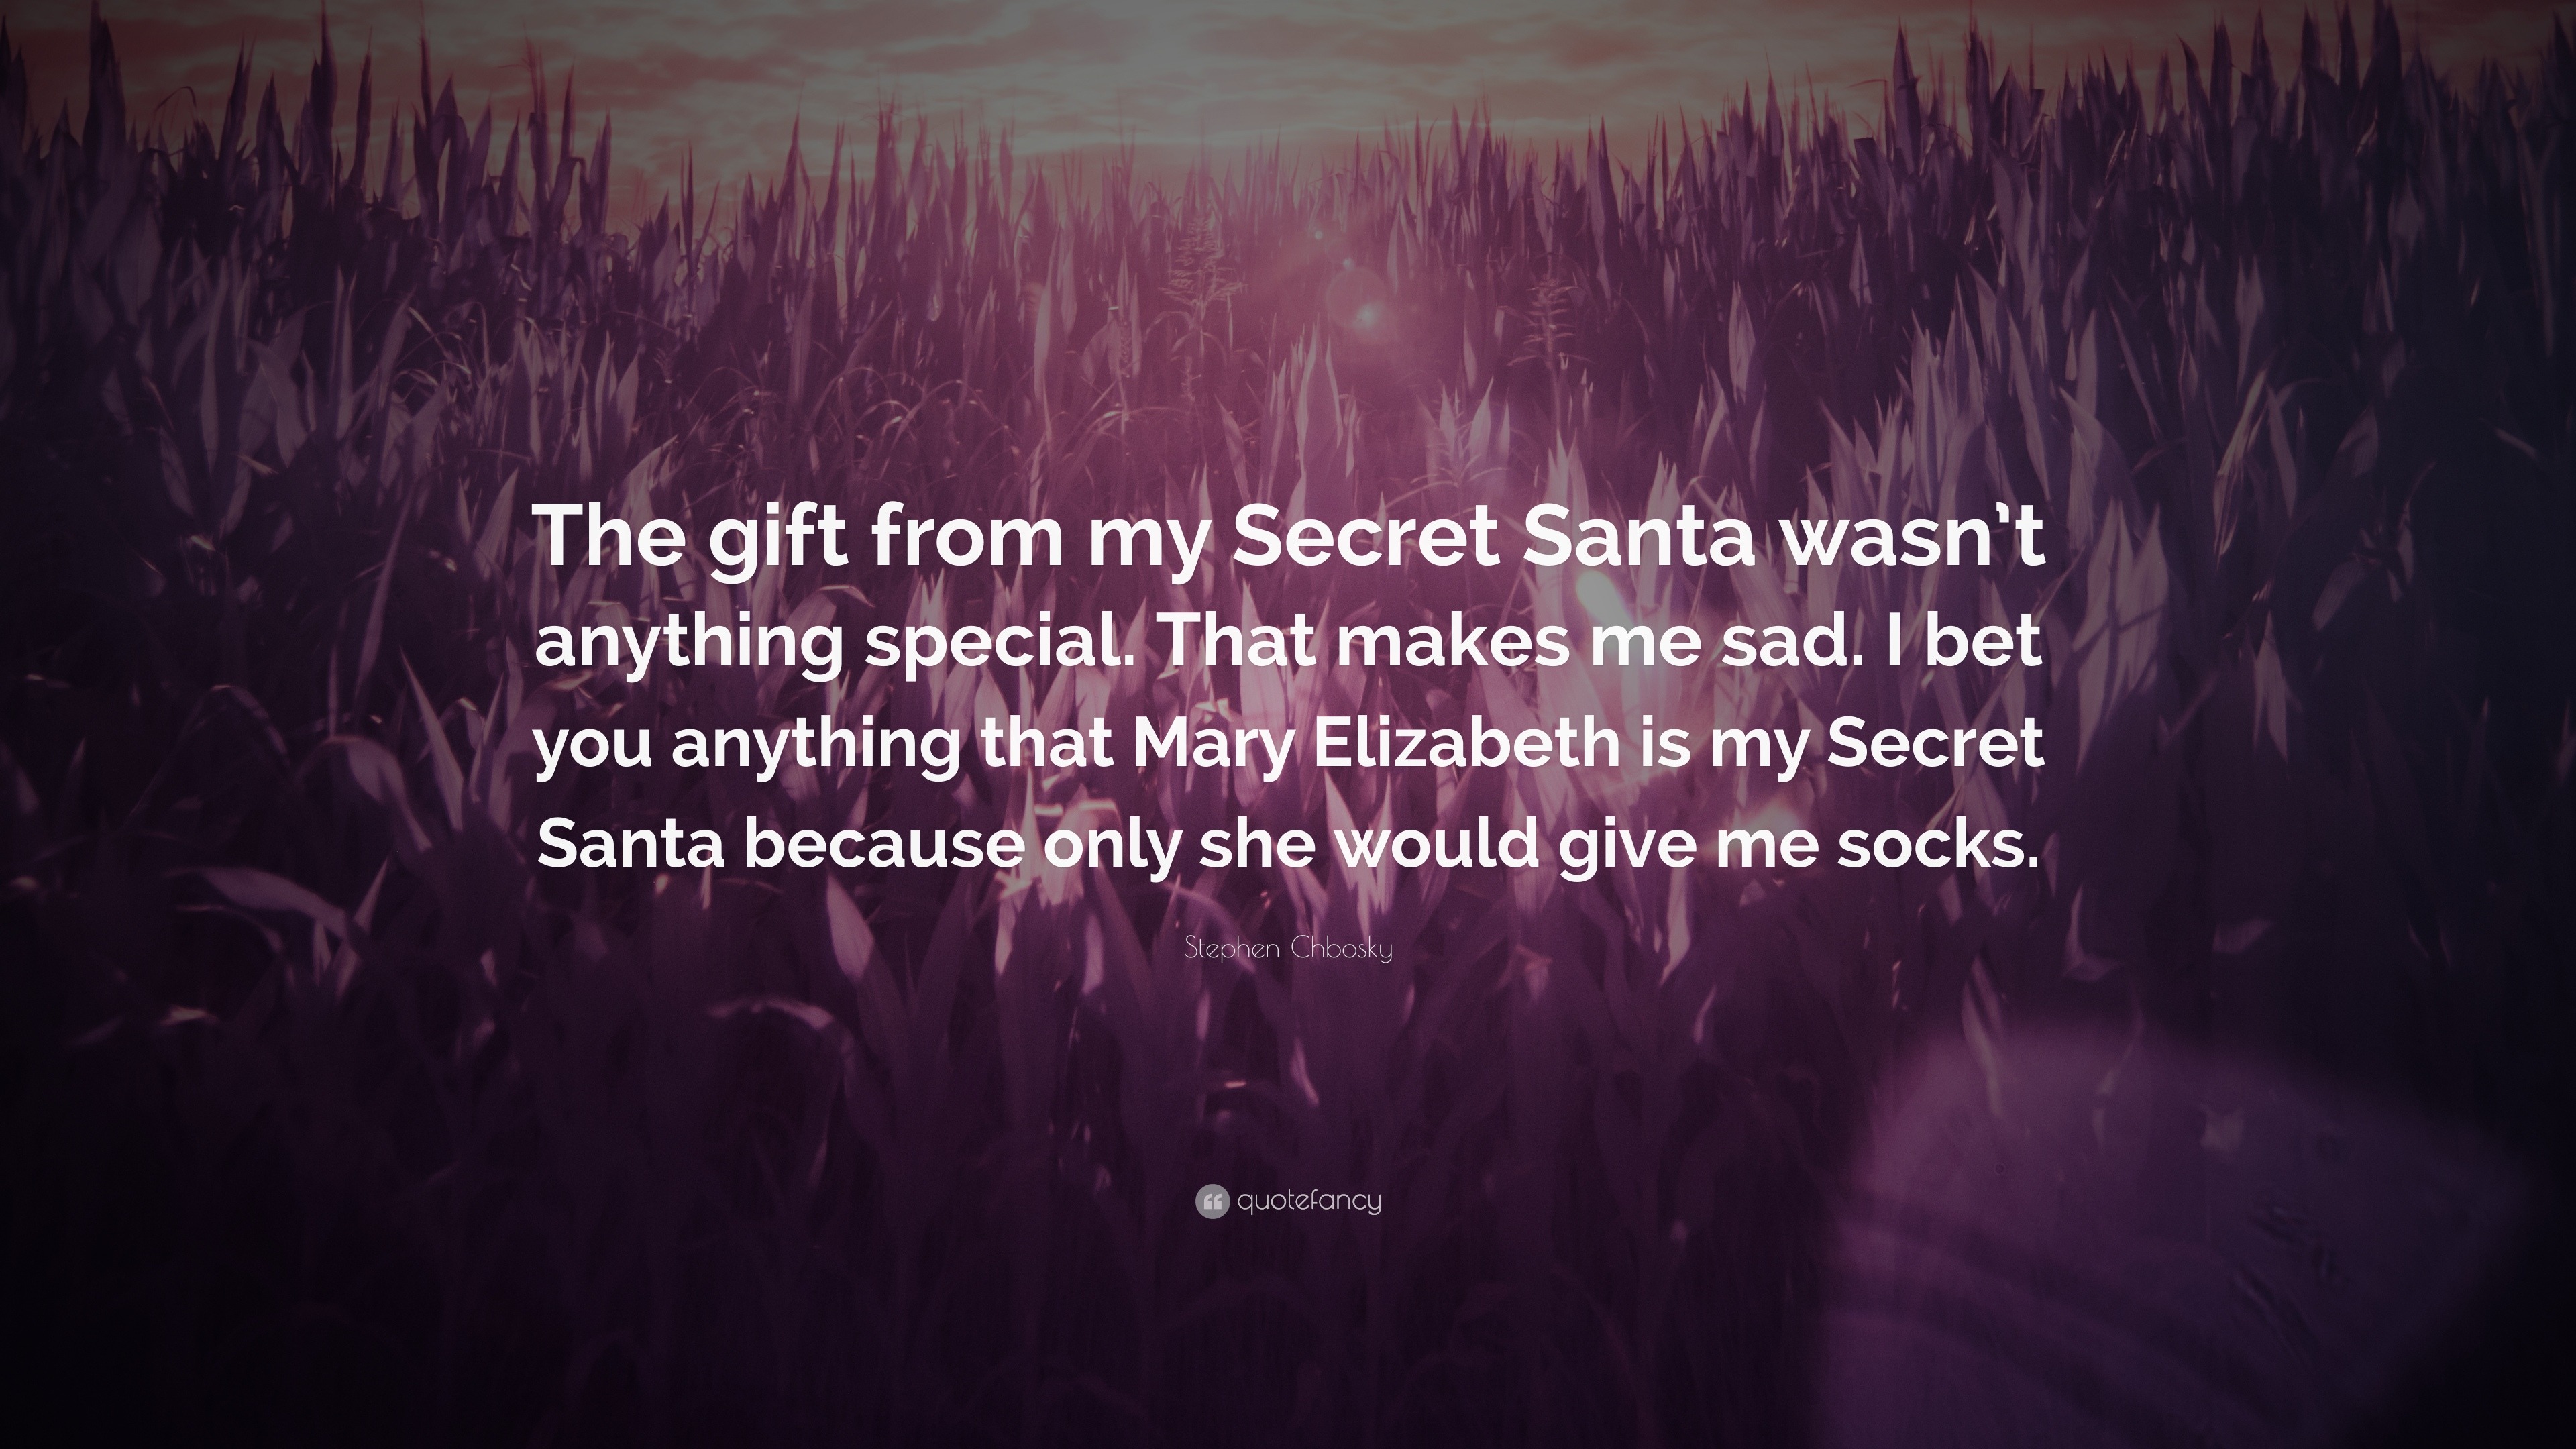 Secret Santa Gift Ideas Your Co-workers Will Love – Navvi.in